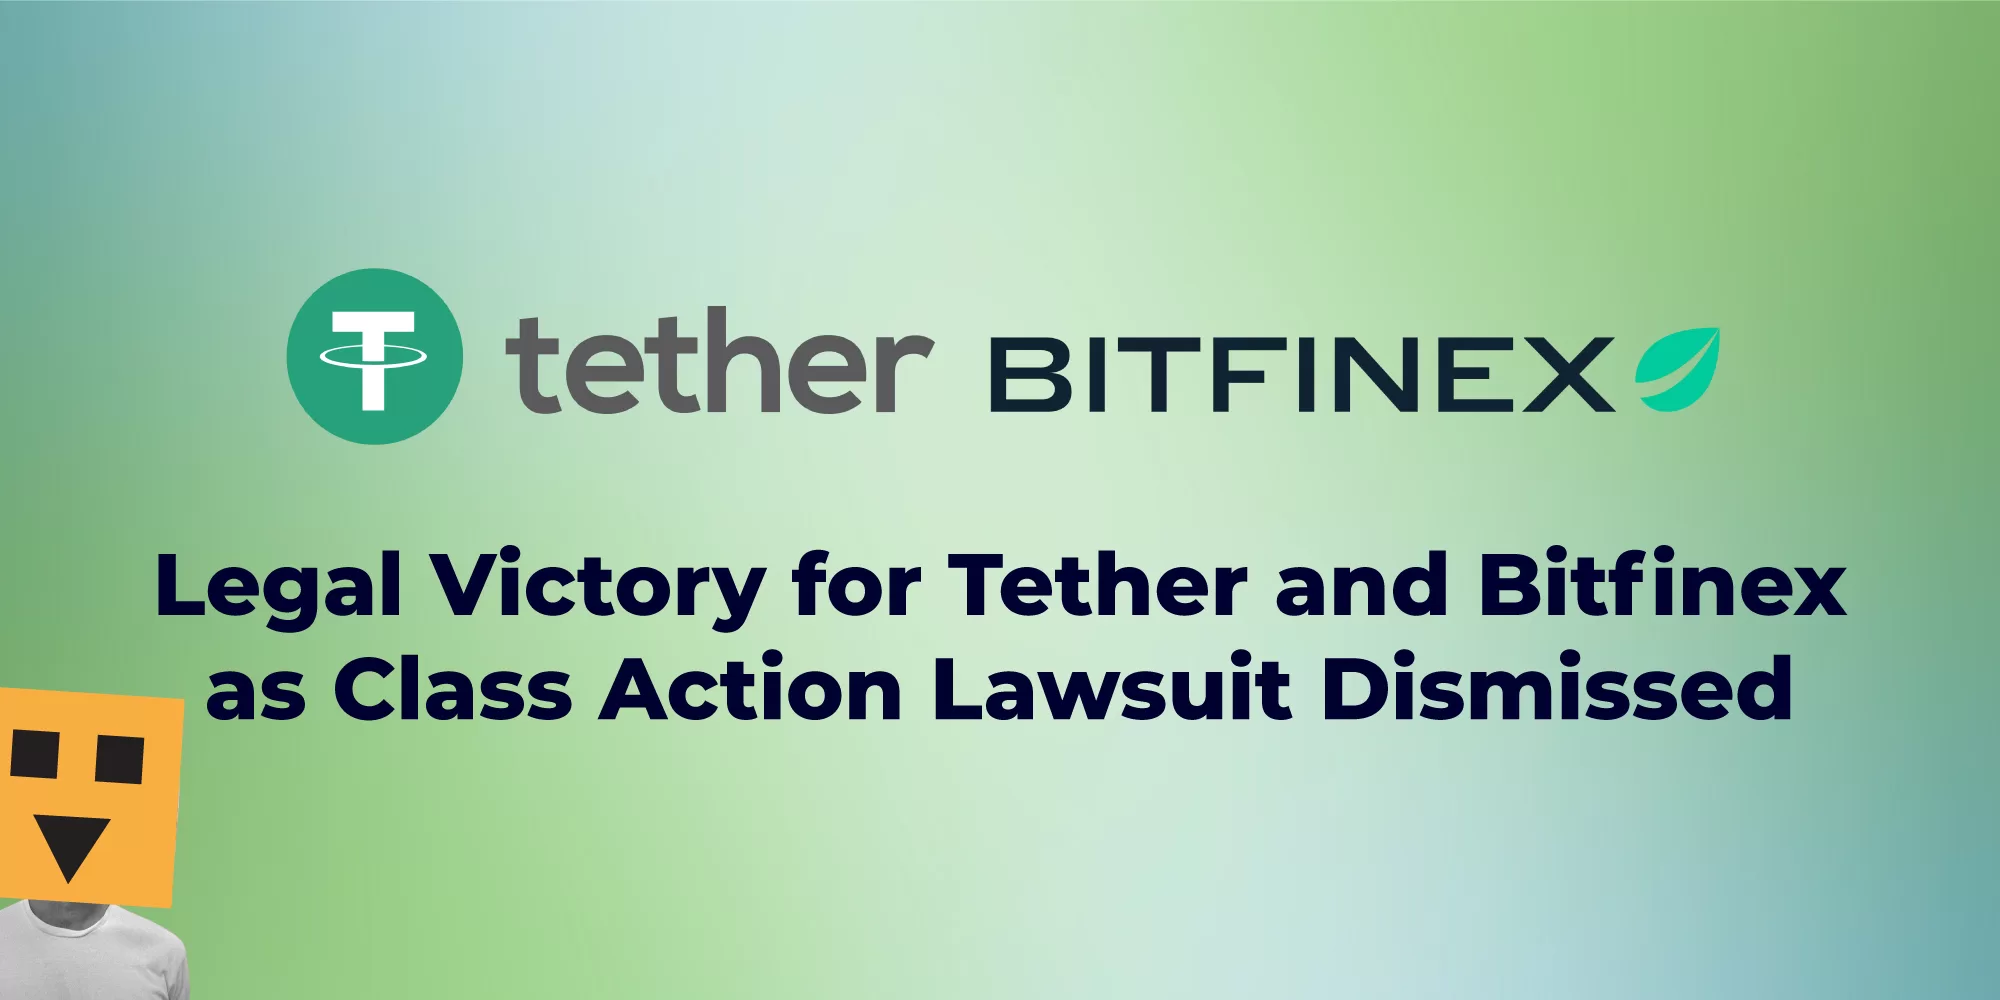 Legal Victory for Tether and Bitfinex as Class Action Lawsuit Dismissed